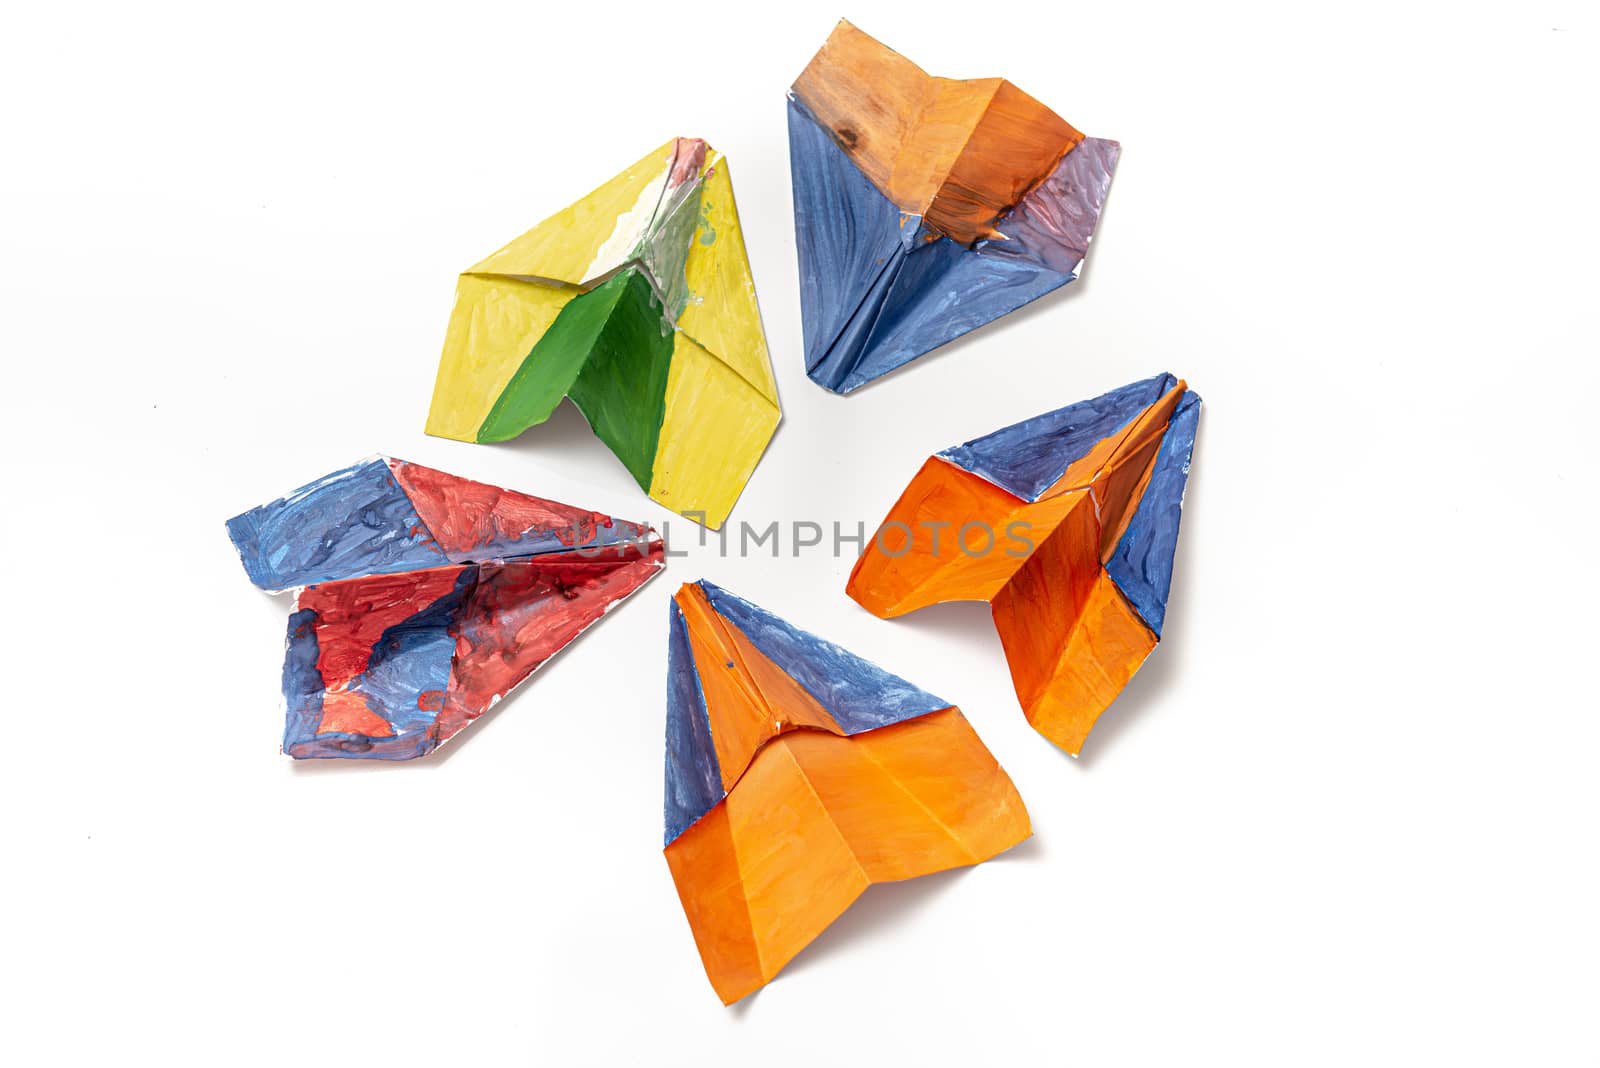 Many color paper plane on a white background with empty place for text